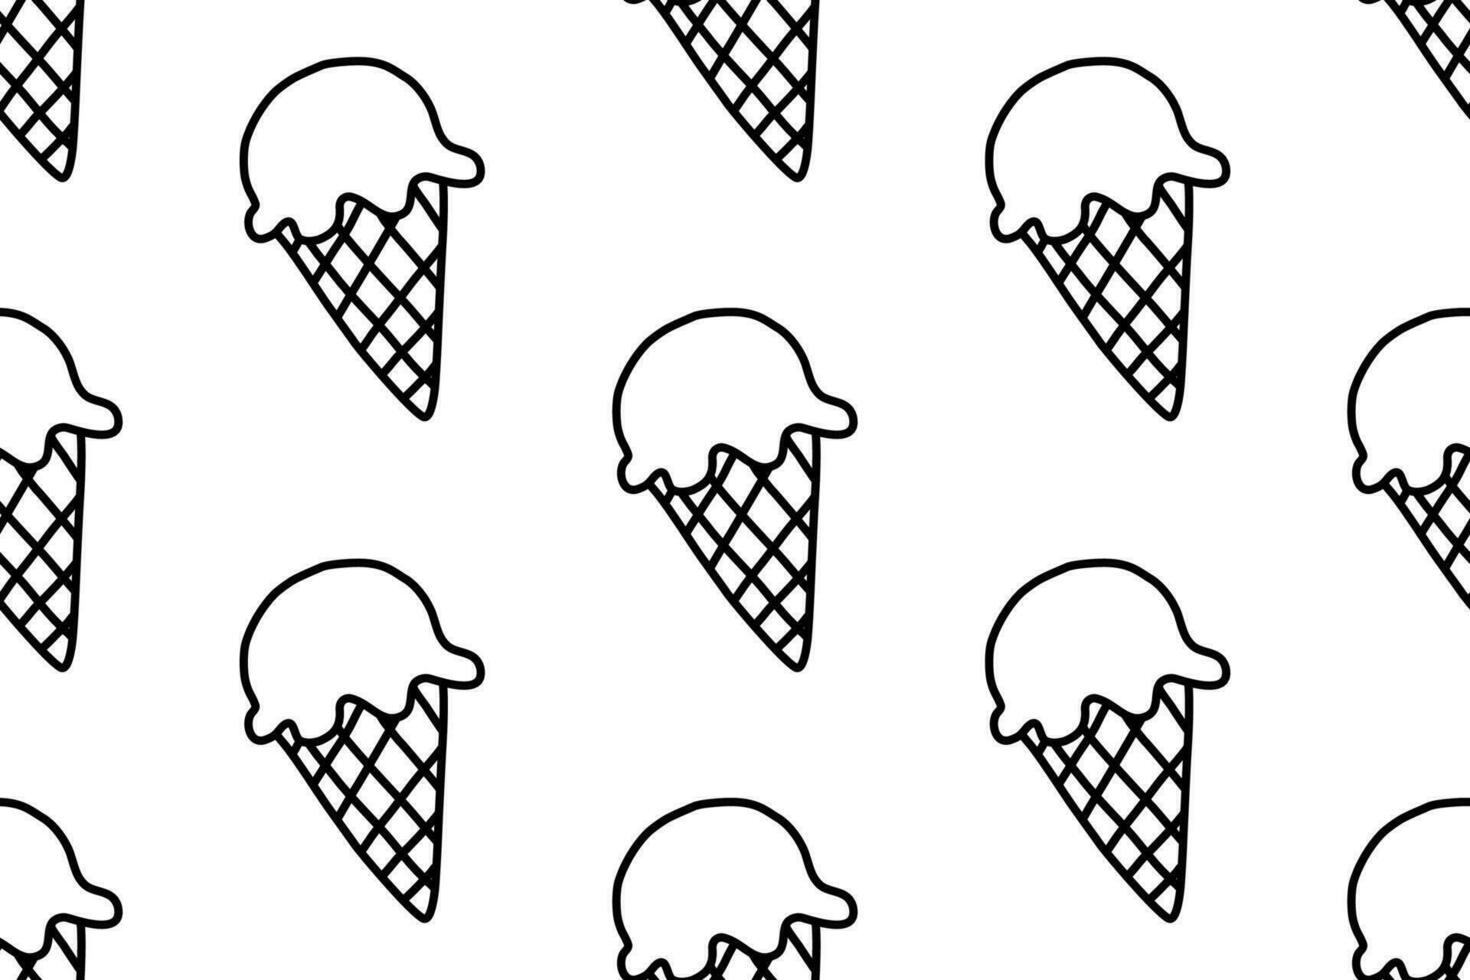 Hand drawn ice cream set linear illustration isolated on white background. Set of vector seamless patterns with ice cream